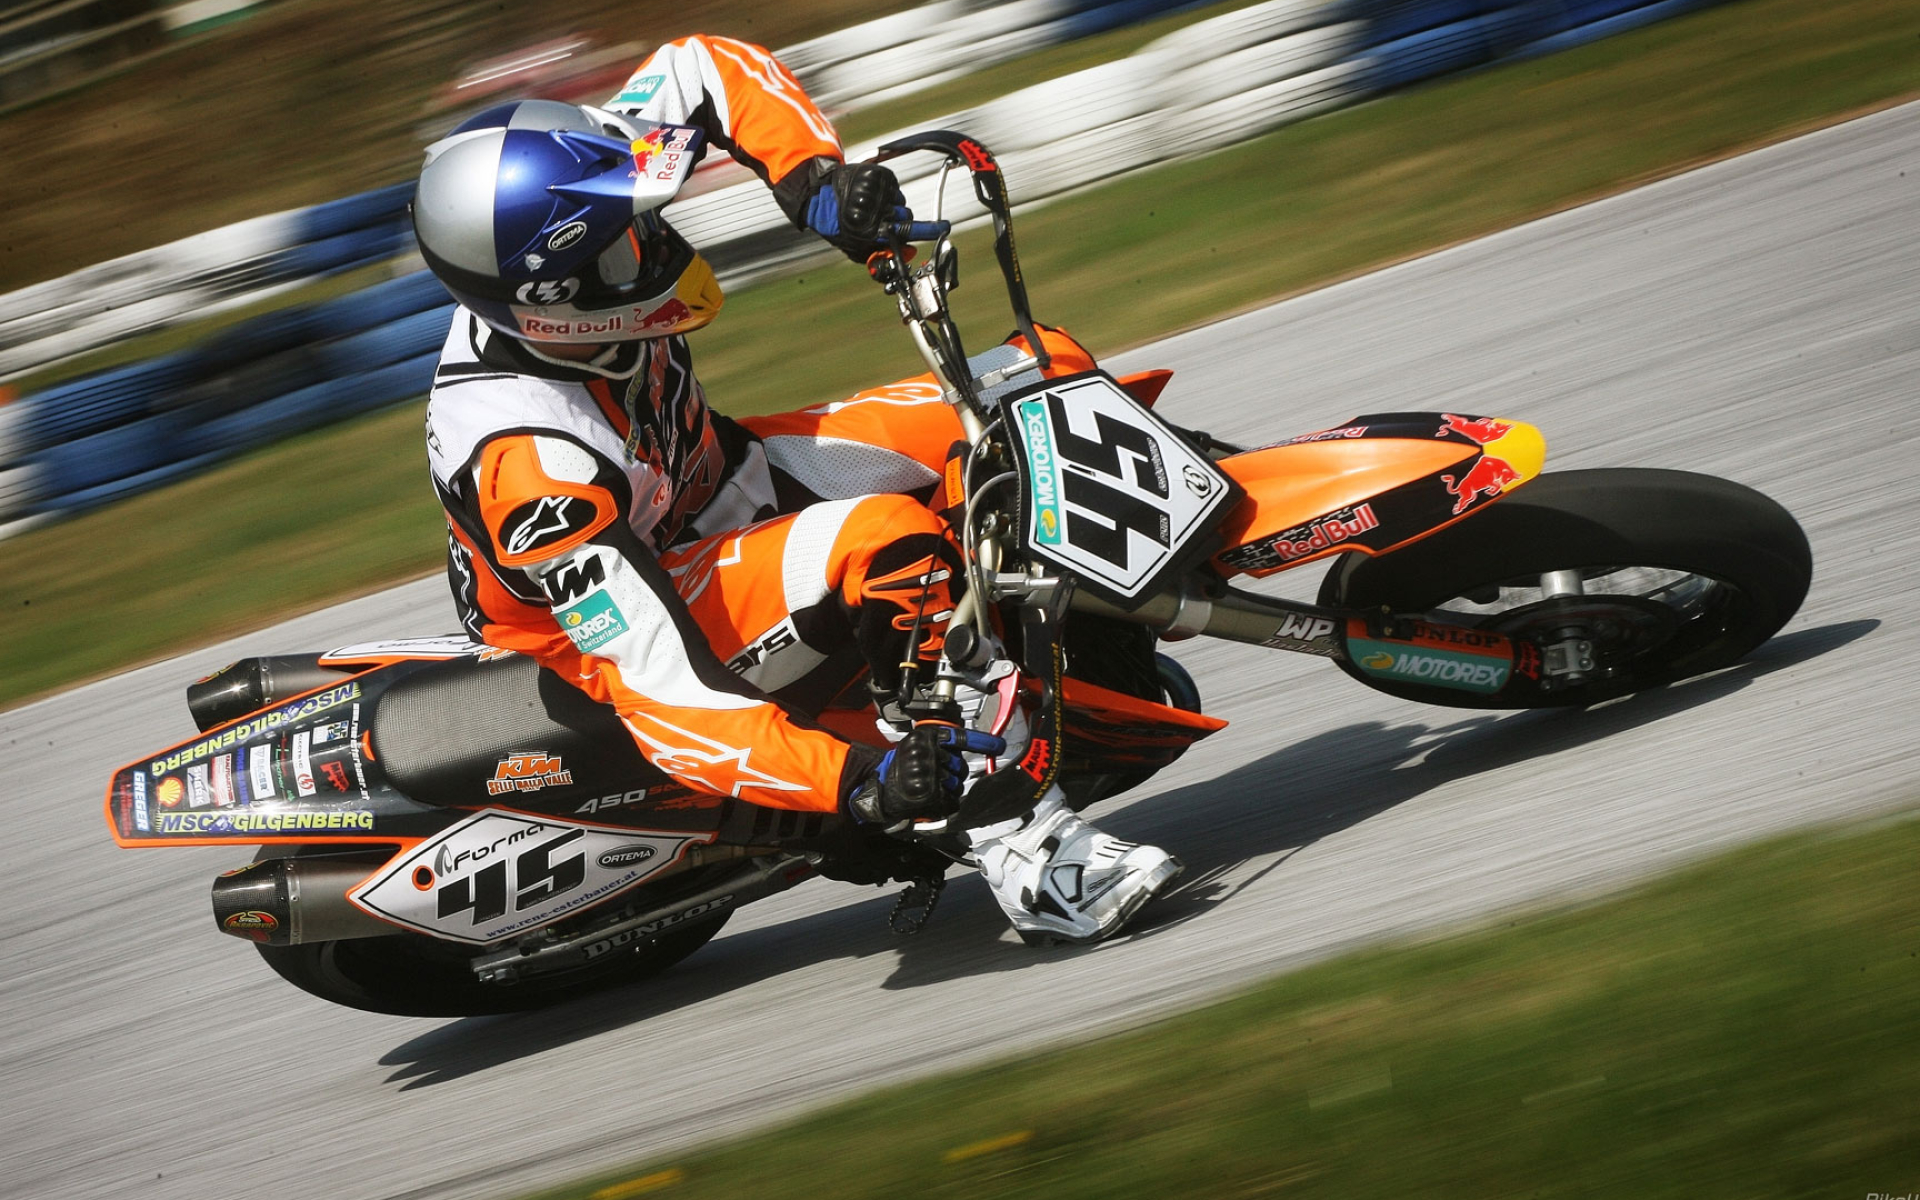 KTM supermoto, Stylish wallpapers, High-resolution images, Motorcycling, 1920x1200 HD Desktop